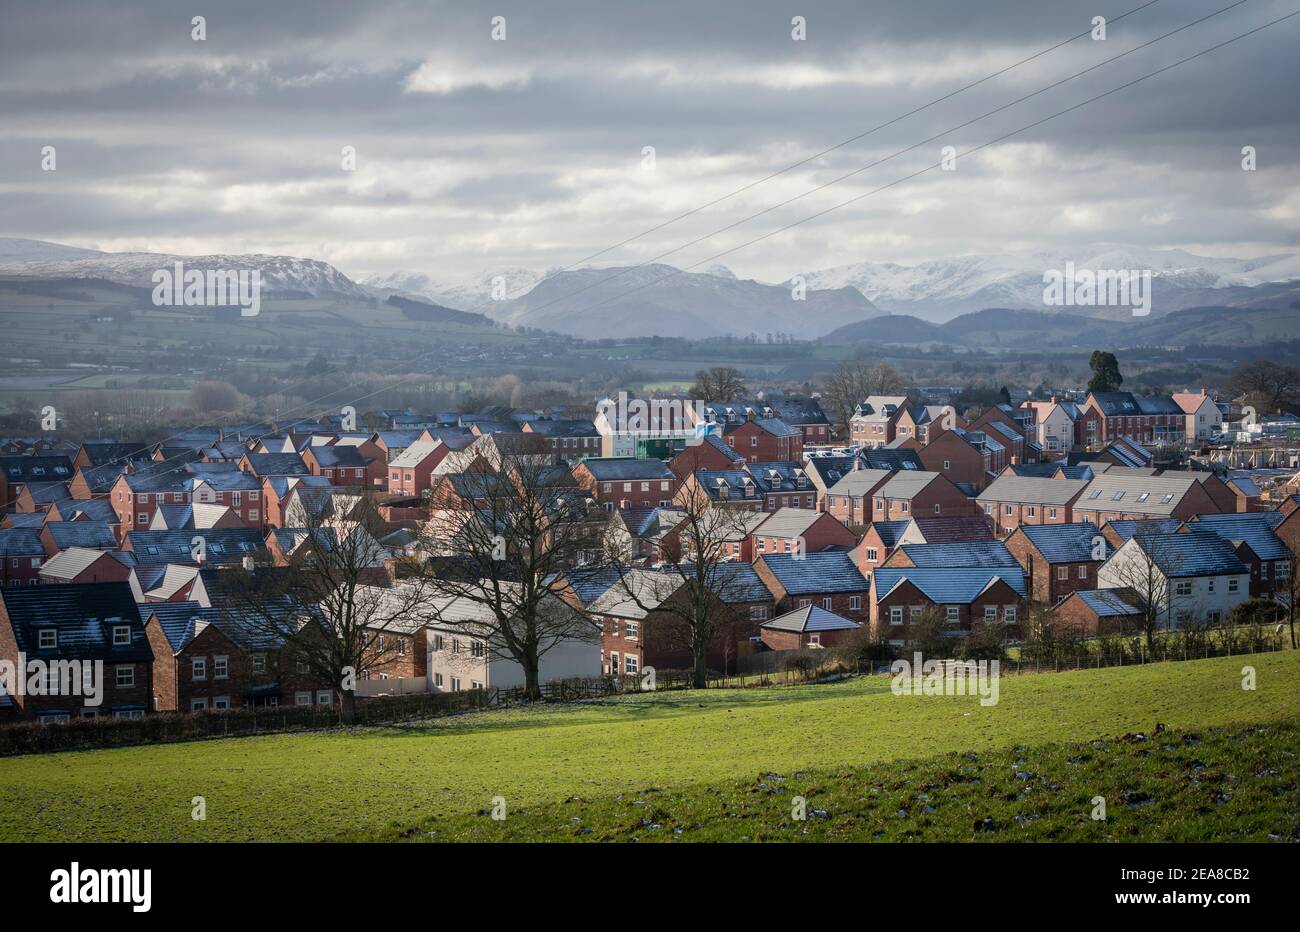 New housing estate in Penrith, Cumbria, on the edge of the Lake District Stock Photo